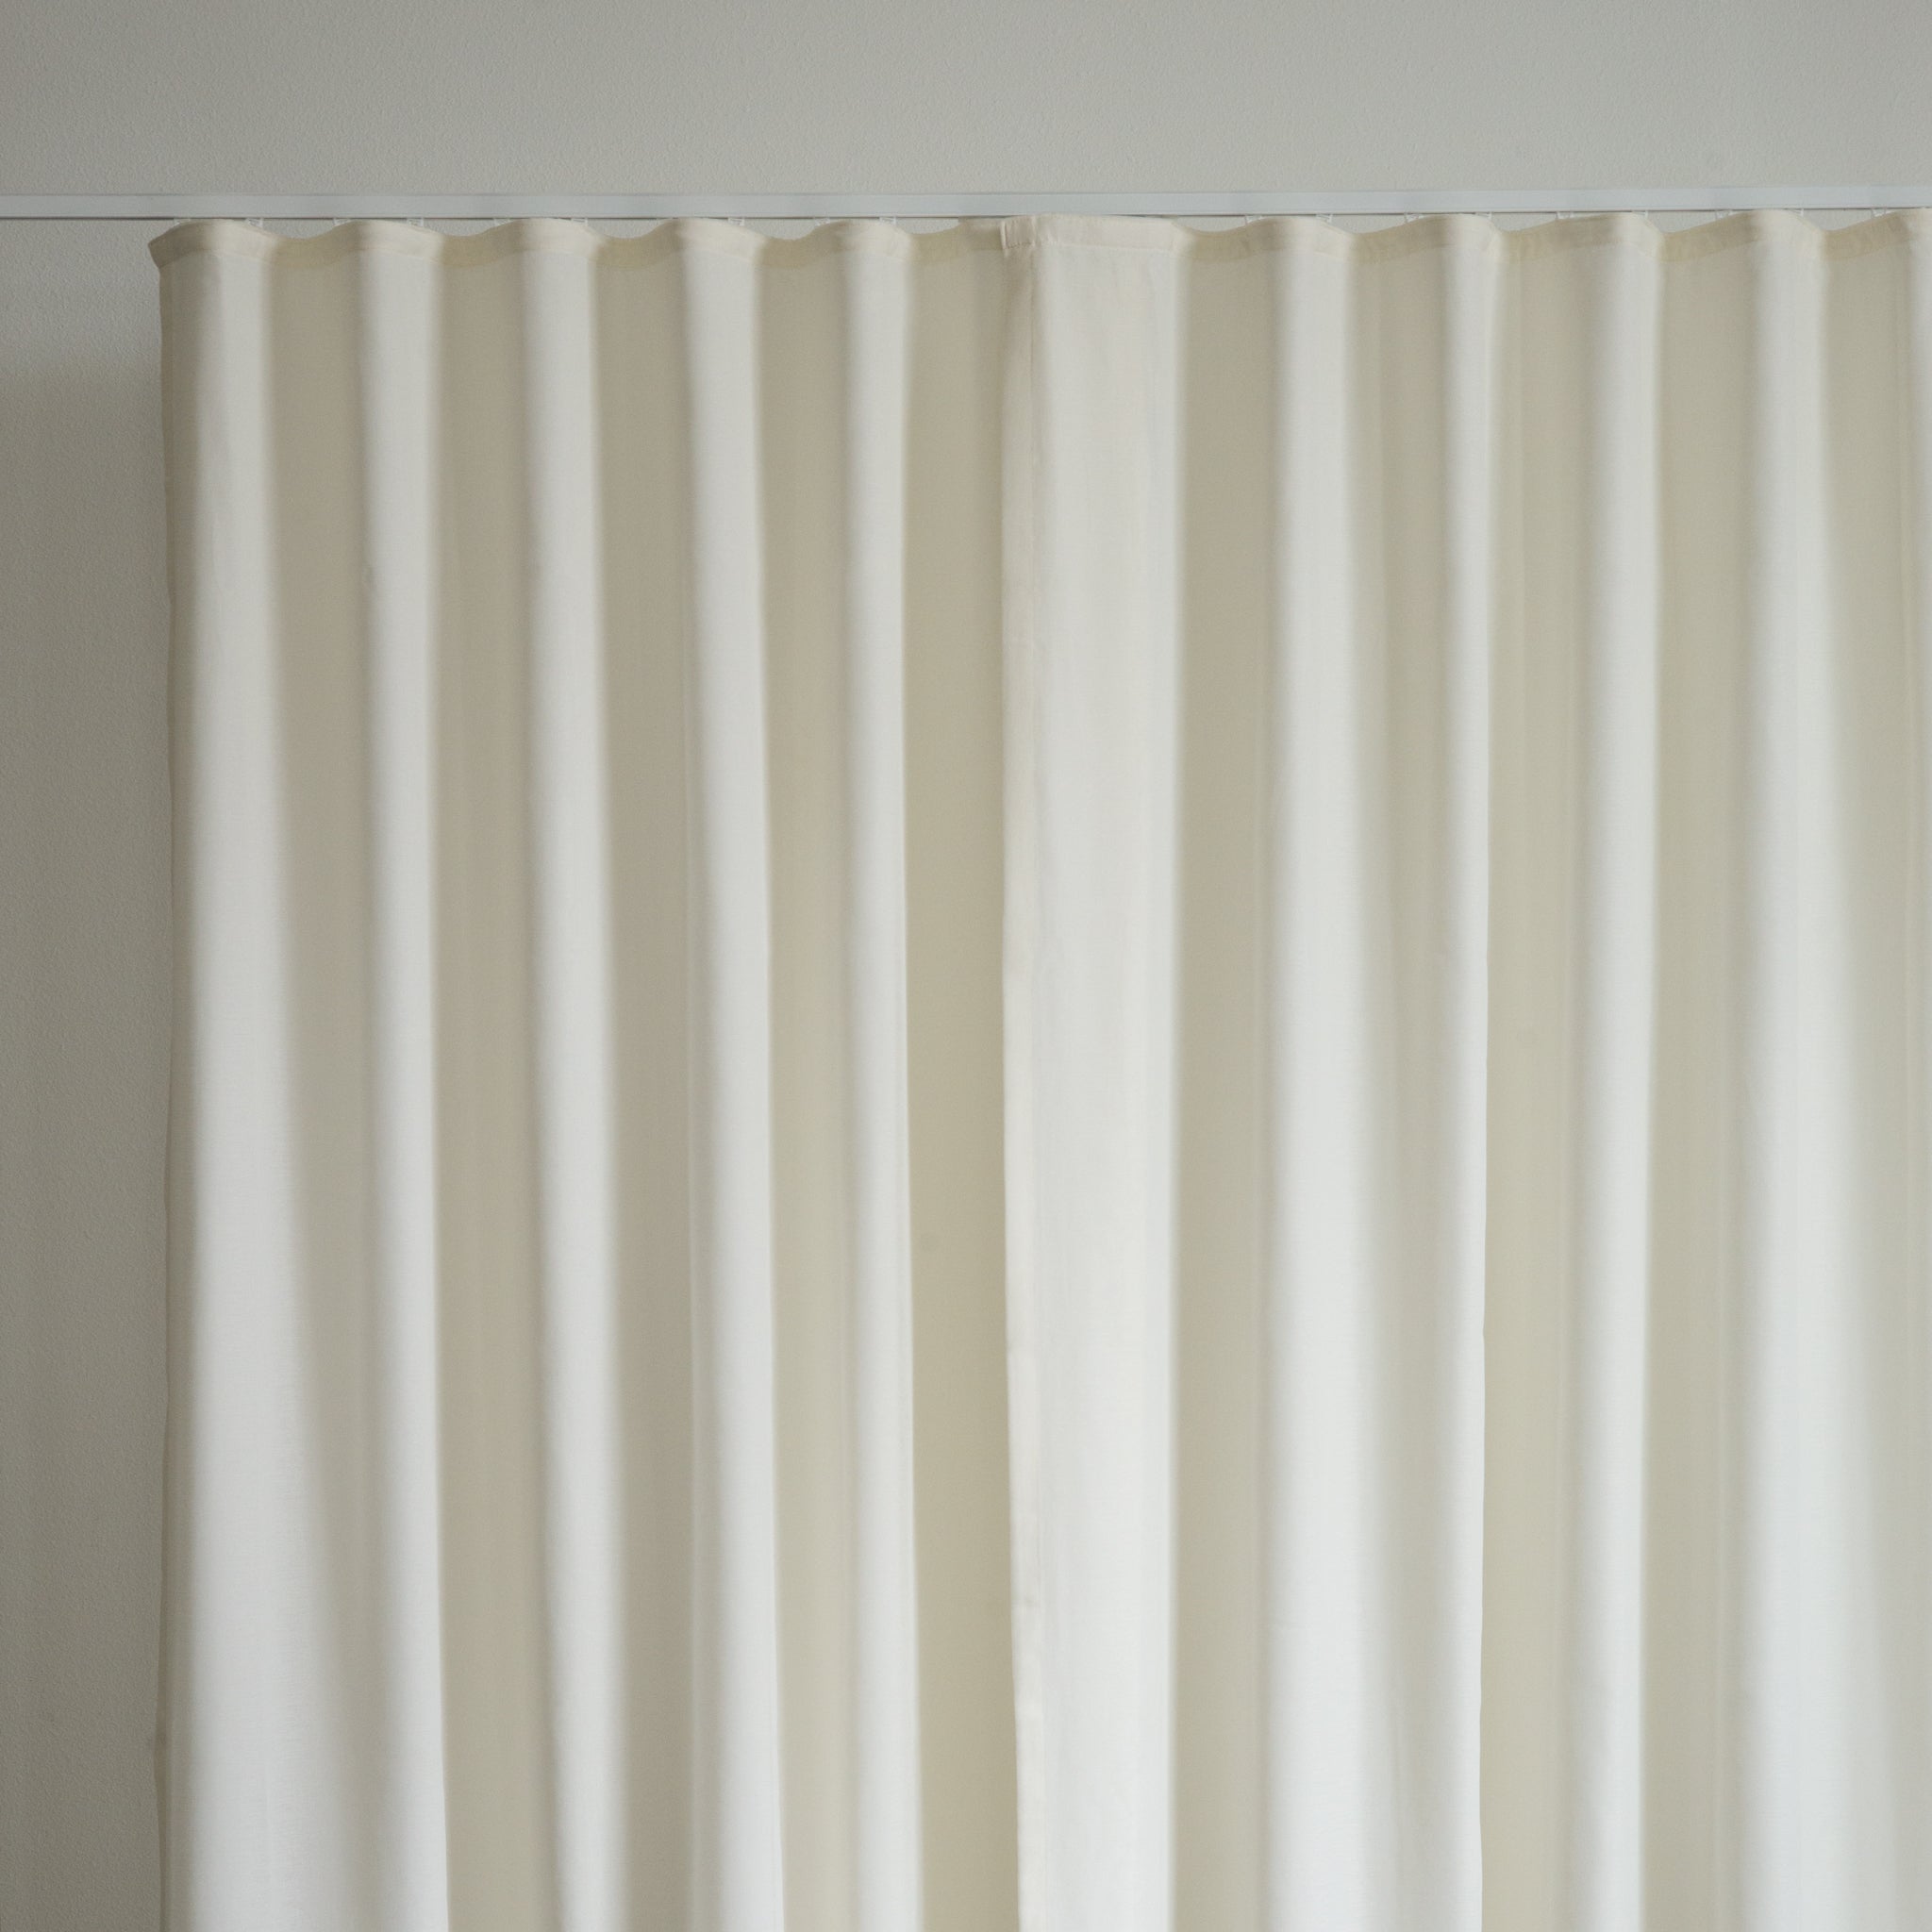 How to decide on the curtain fullness